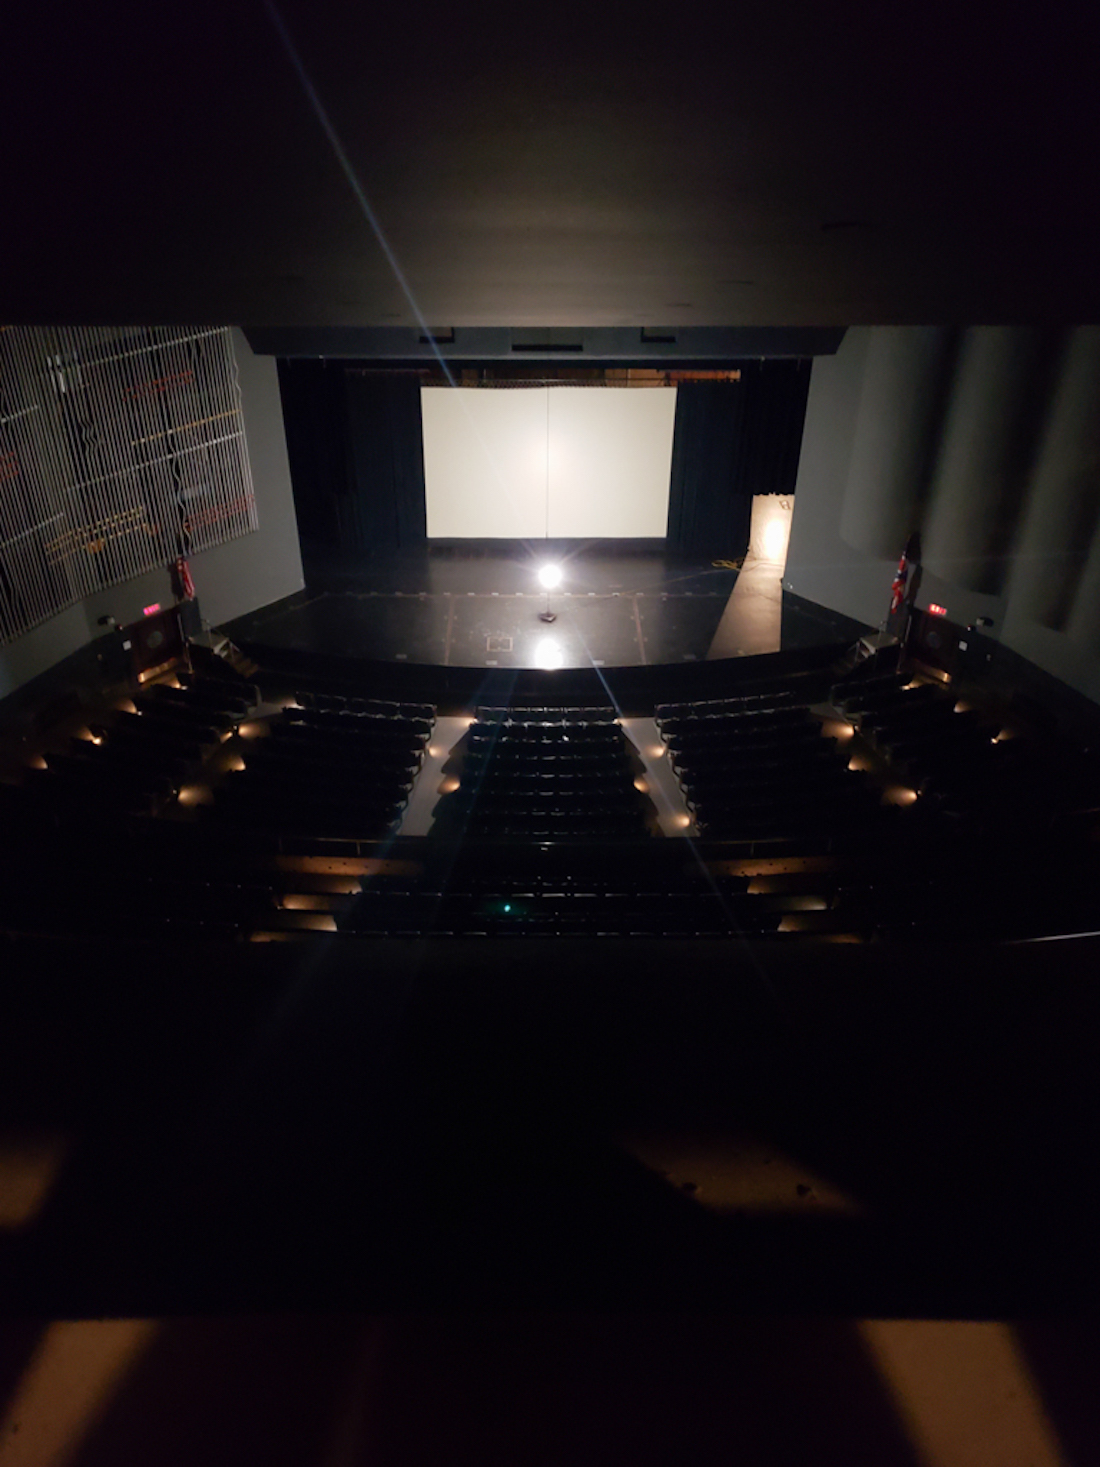 Mershon Auditorium as seen from the projection booth